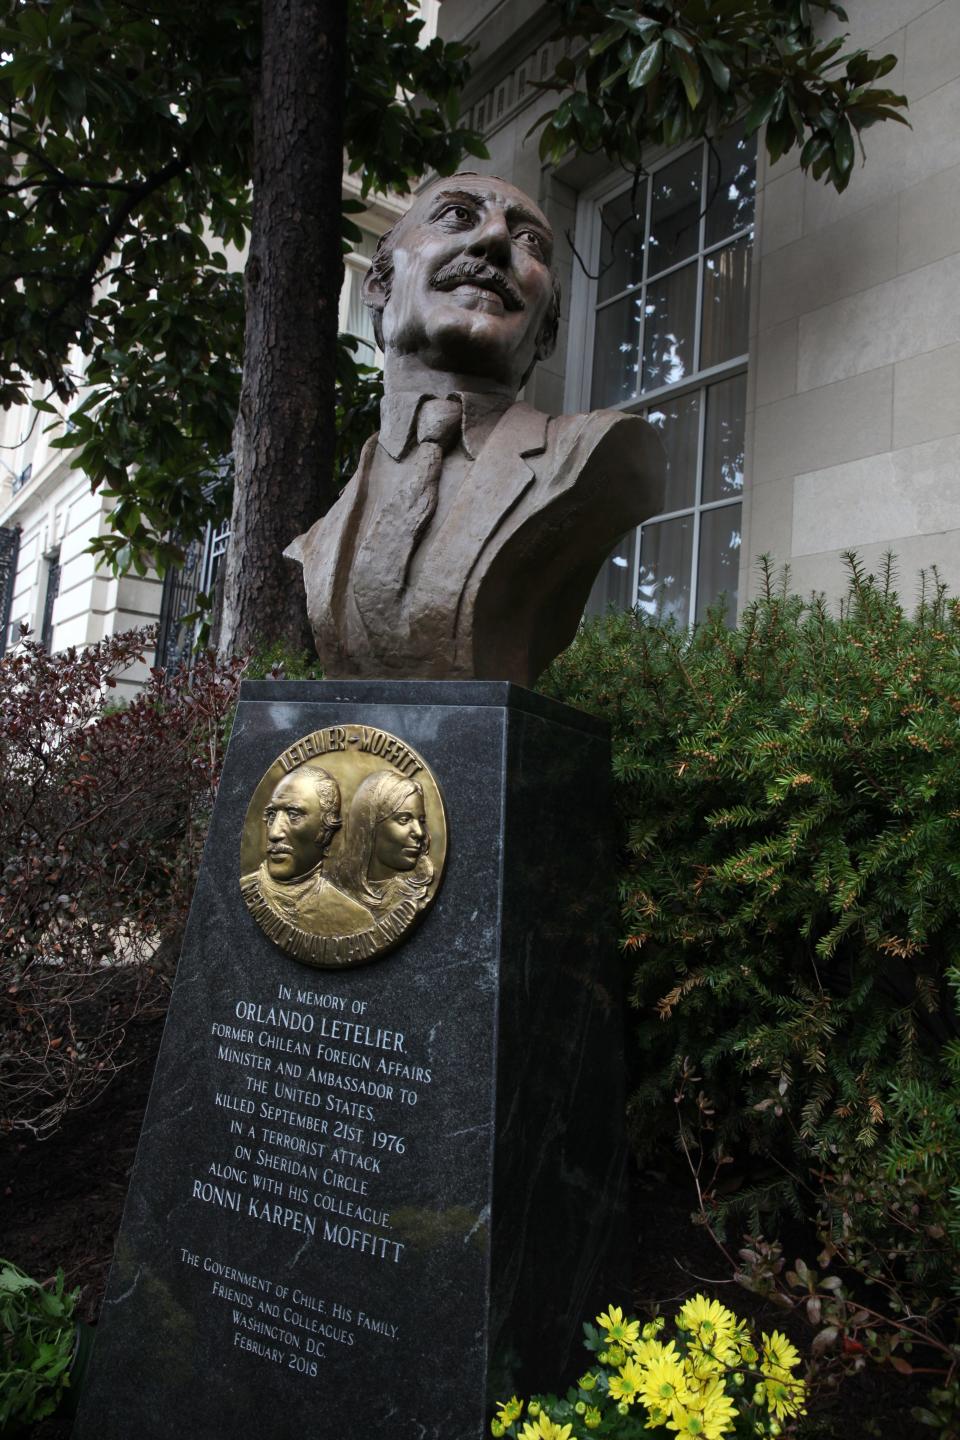 A statue honoring Orlando Letelier was unveiled at the residence of the Chilean ambassador to the United States in Washington, D.C. on Feb. 25, 2018.